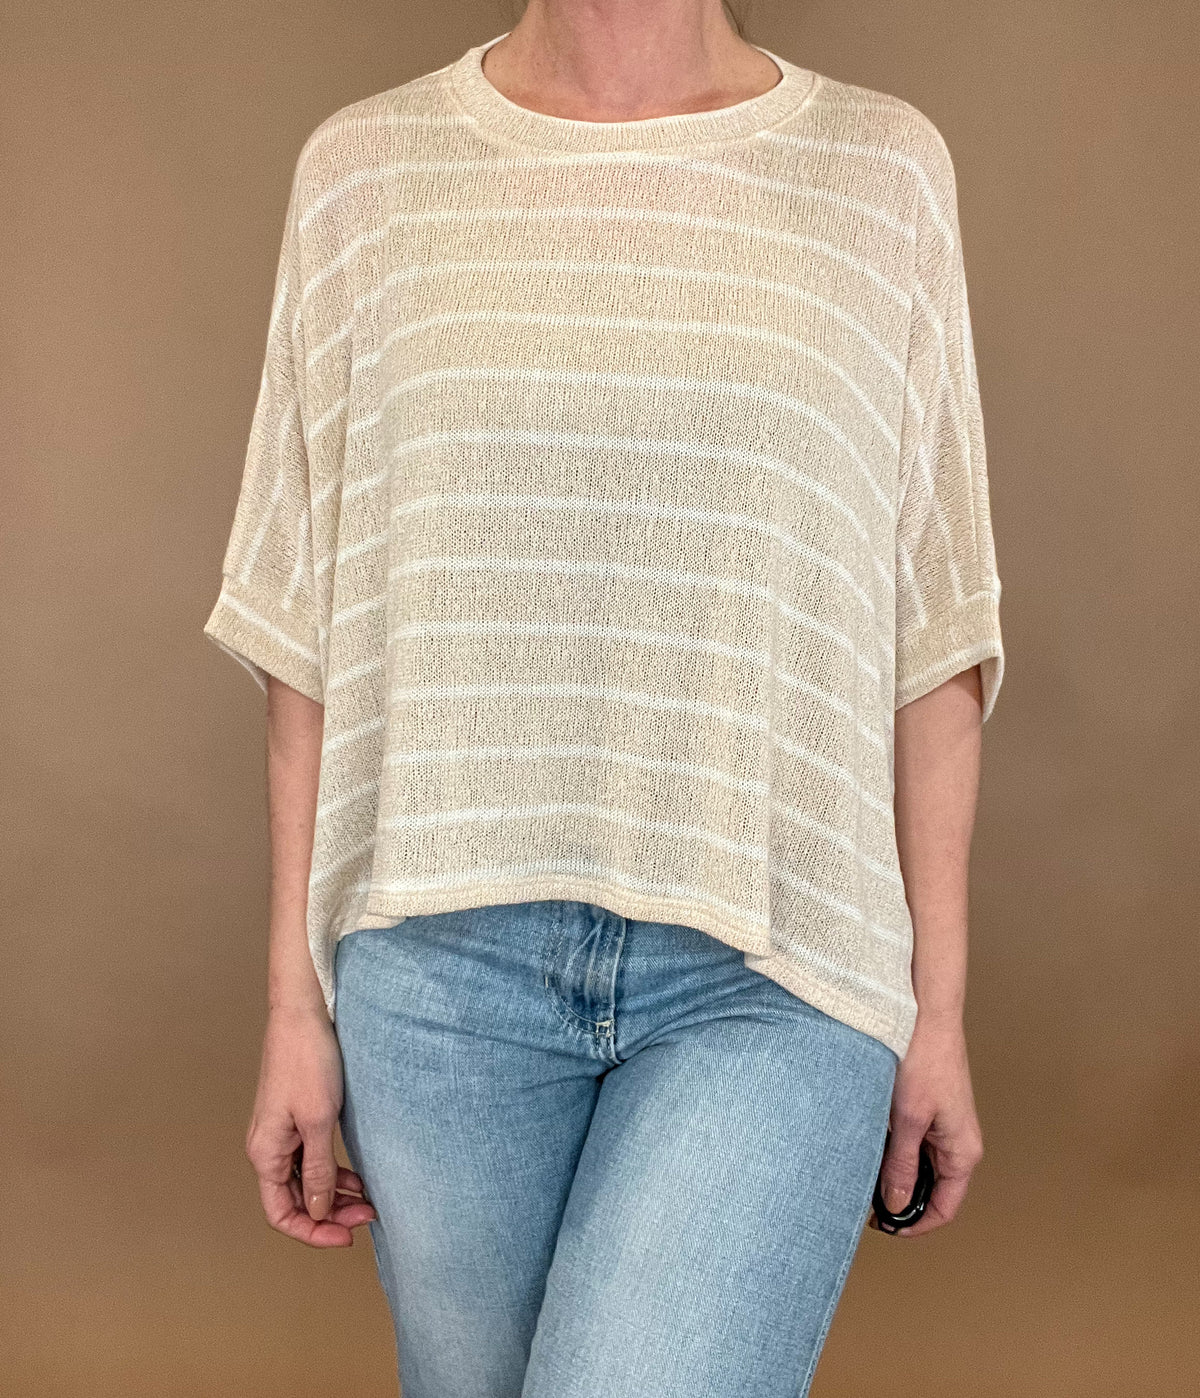 <span><br>Experience comfort and style with our Carefree Lightweight Top. Made for layering over a tank, this loose-fit poncho top is perfect for any casual occasion. Its lightweight design and short sleeves make it an ideal match with light wash denim. Upgrade your wardrobe with this must-have piece. </span>&nbsp;